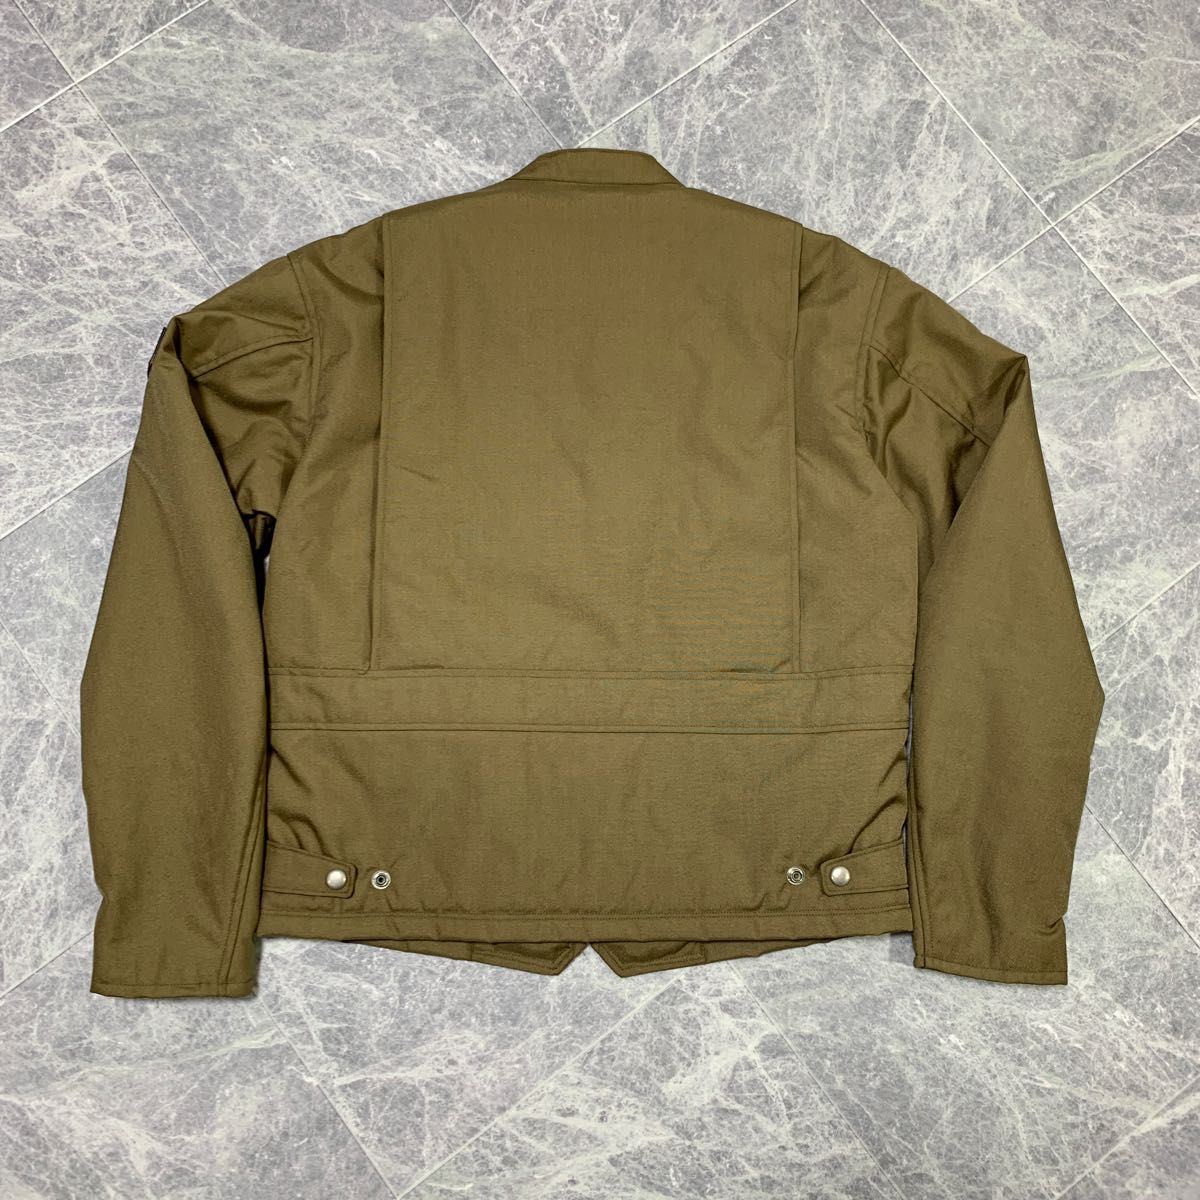 HAROLD'S GEAR Thinsulate BIKERS JACKET｜PayPayフリマ